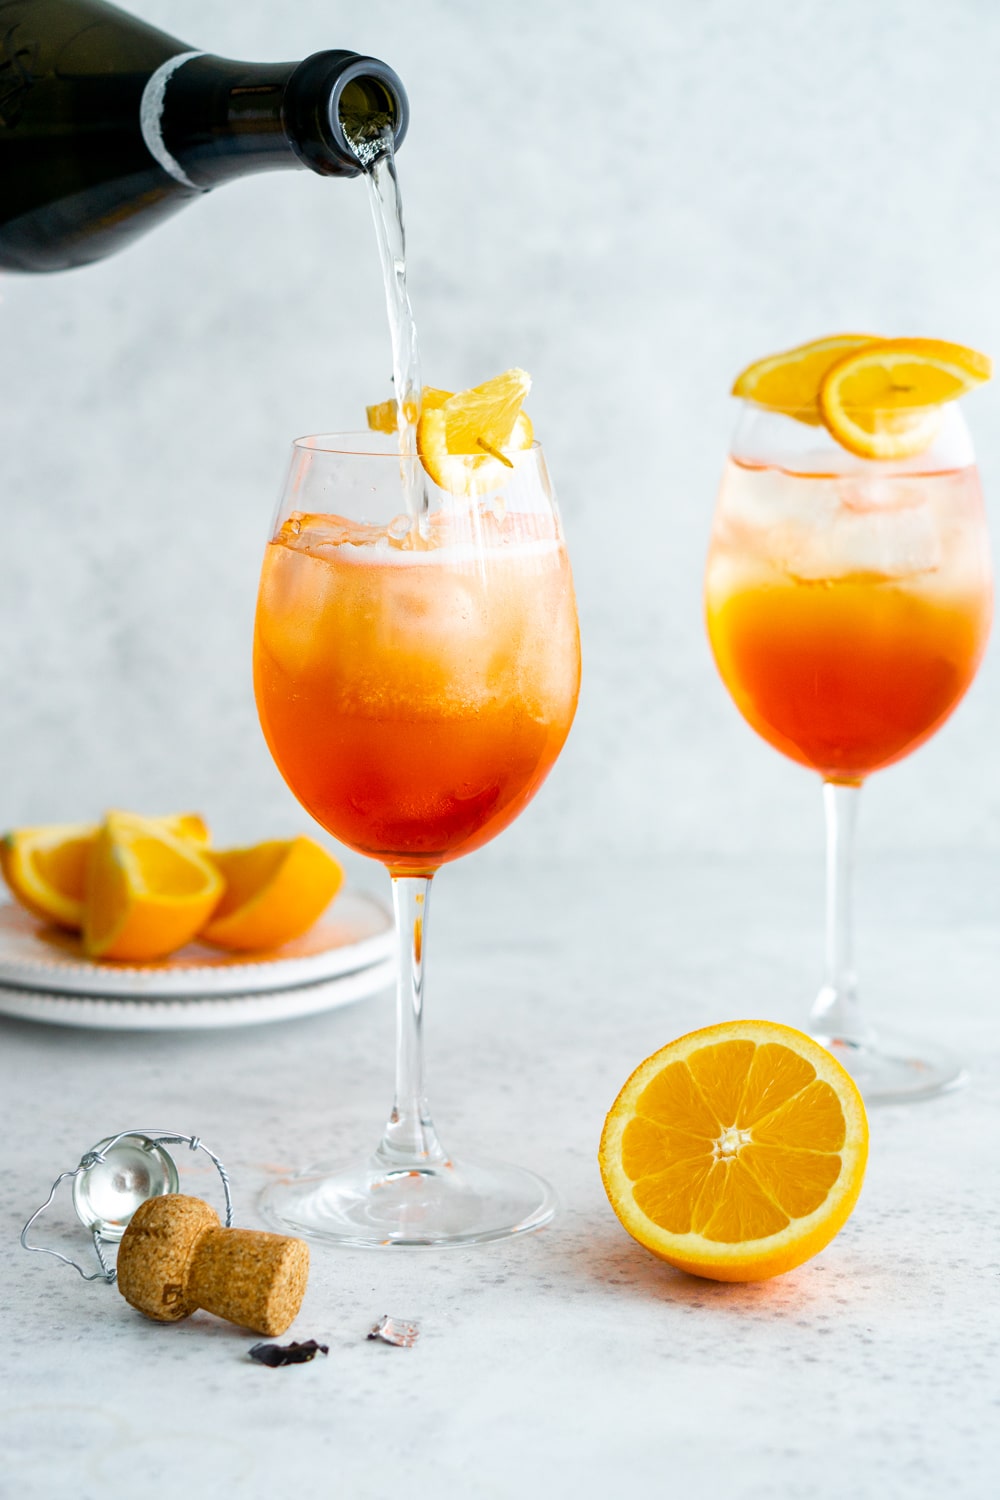 2 glasses of aperol spritz with prosecco being poured into one glass